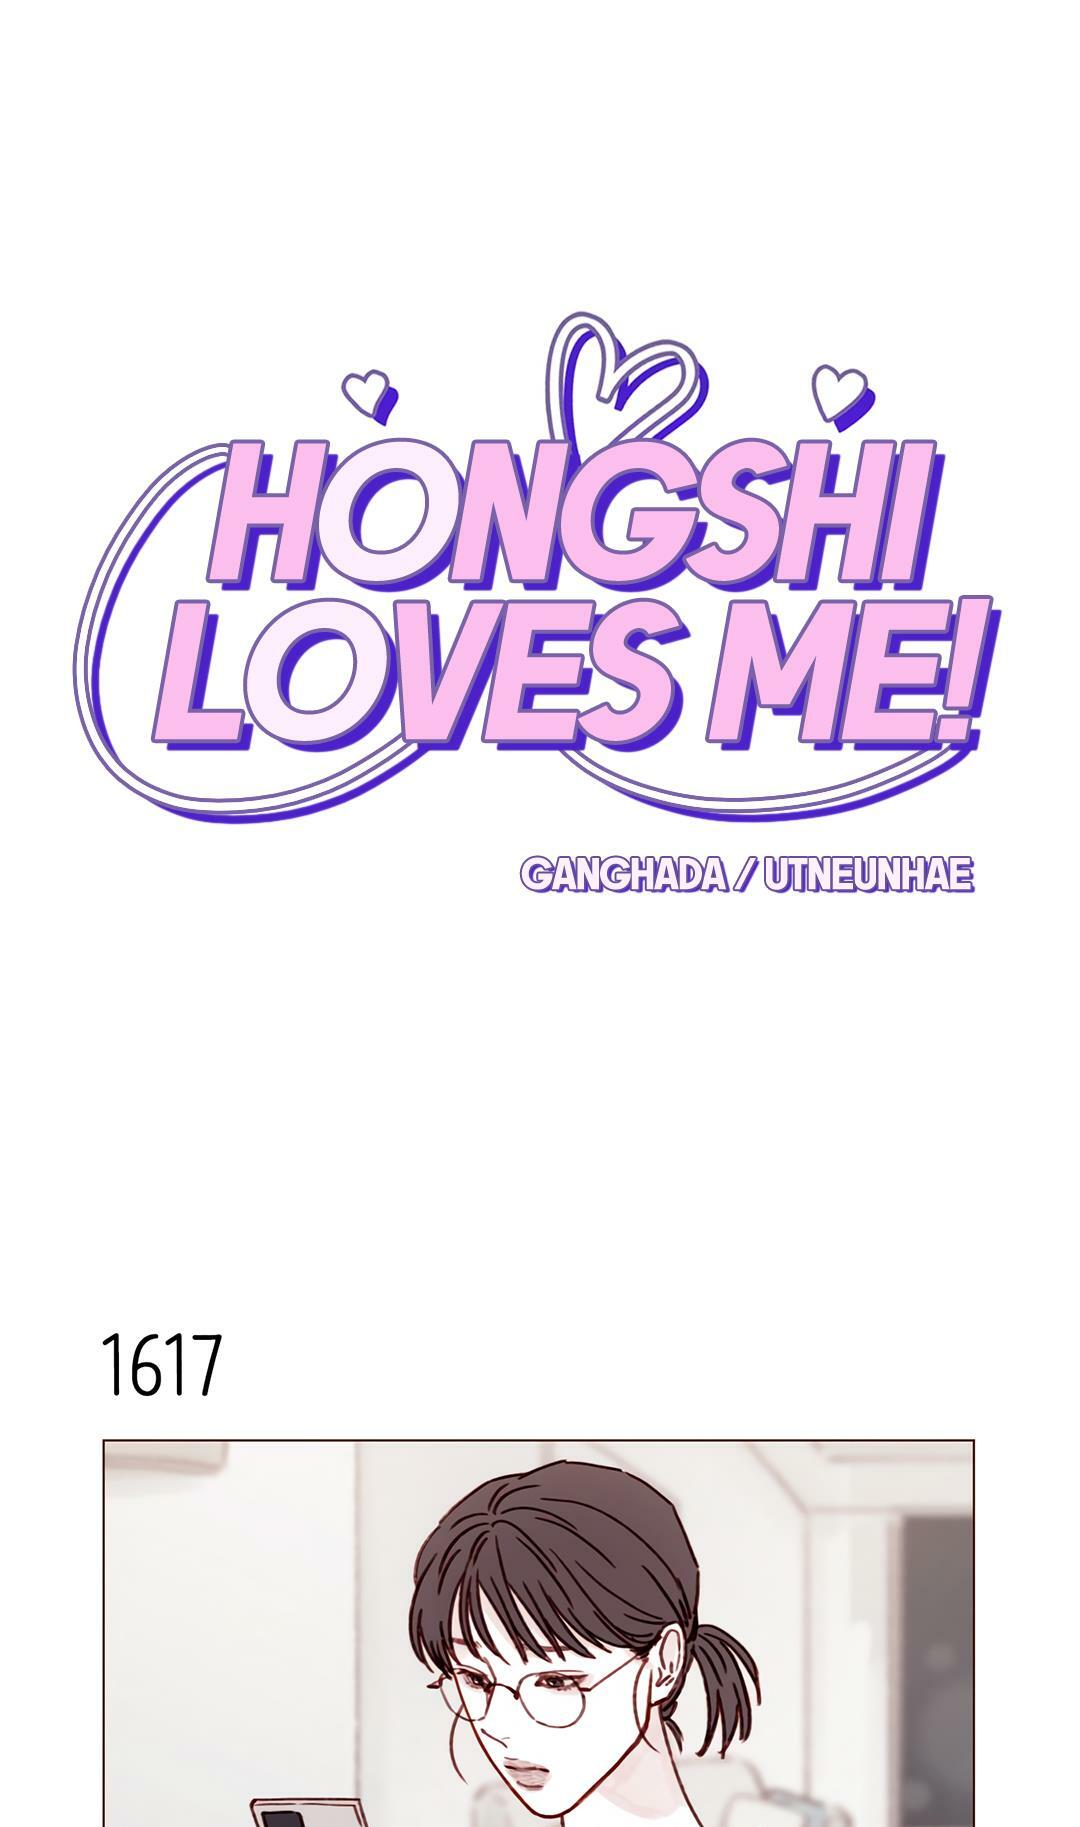 Read Hongshi Loves Me! Chapter 113: The Name Of The Guy You're